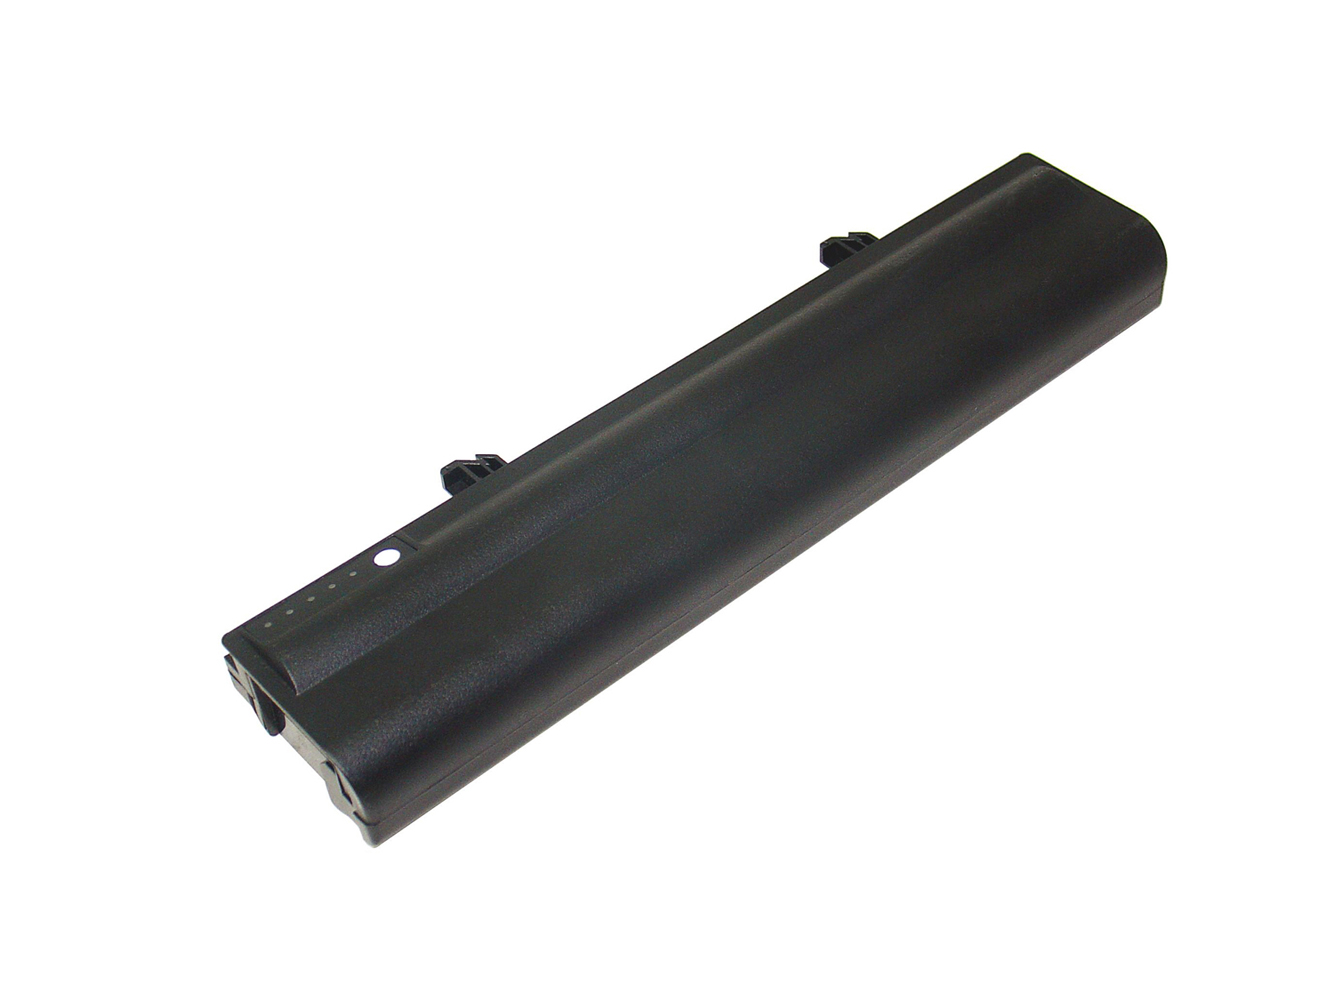 312-0436, 451-10356 replacement Laptop Battery for Dell XPS 14 L421X Ultrabook, XPS 14 Ultrabook, 5200mAh, 11.10V